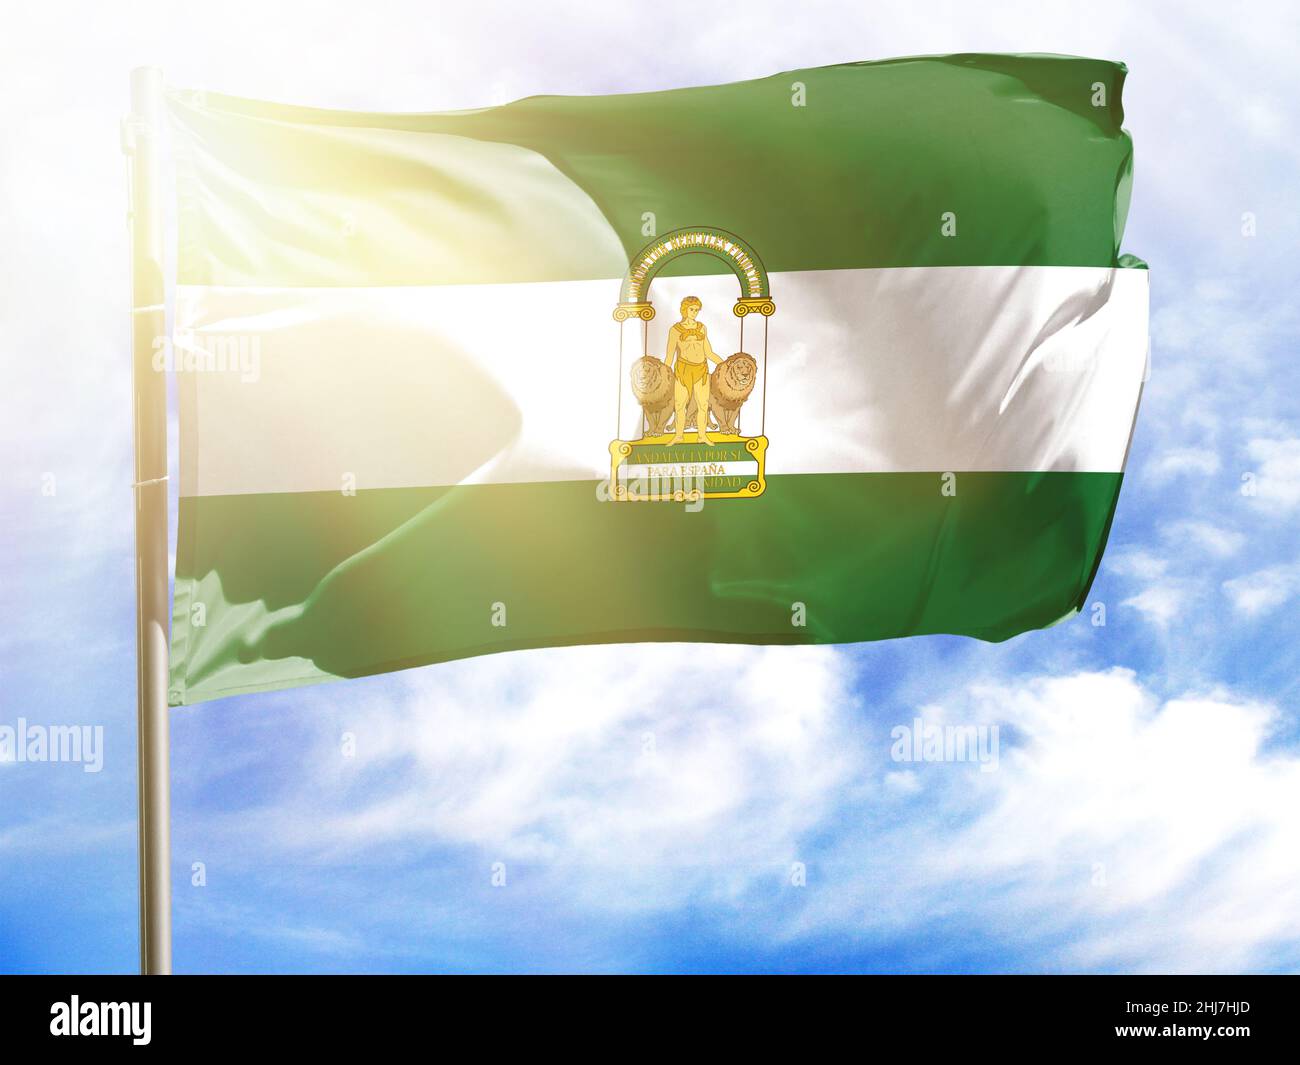 Flagpole with flag of Andalusia Stock Photo